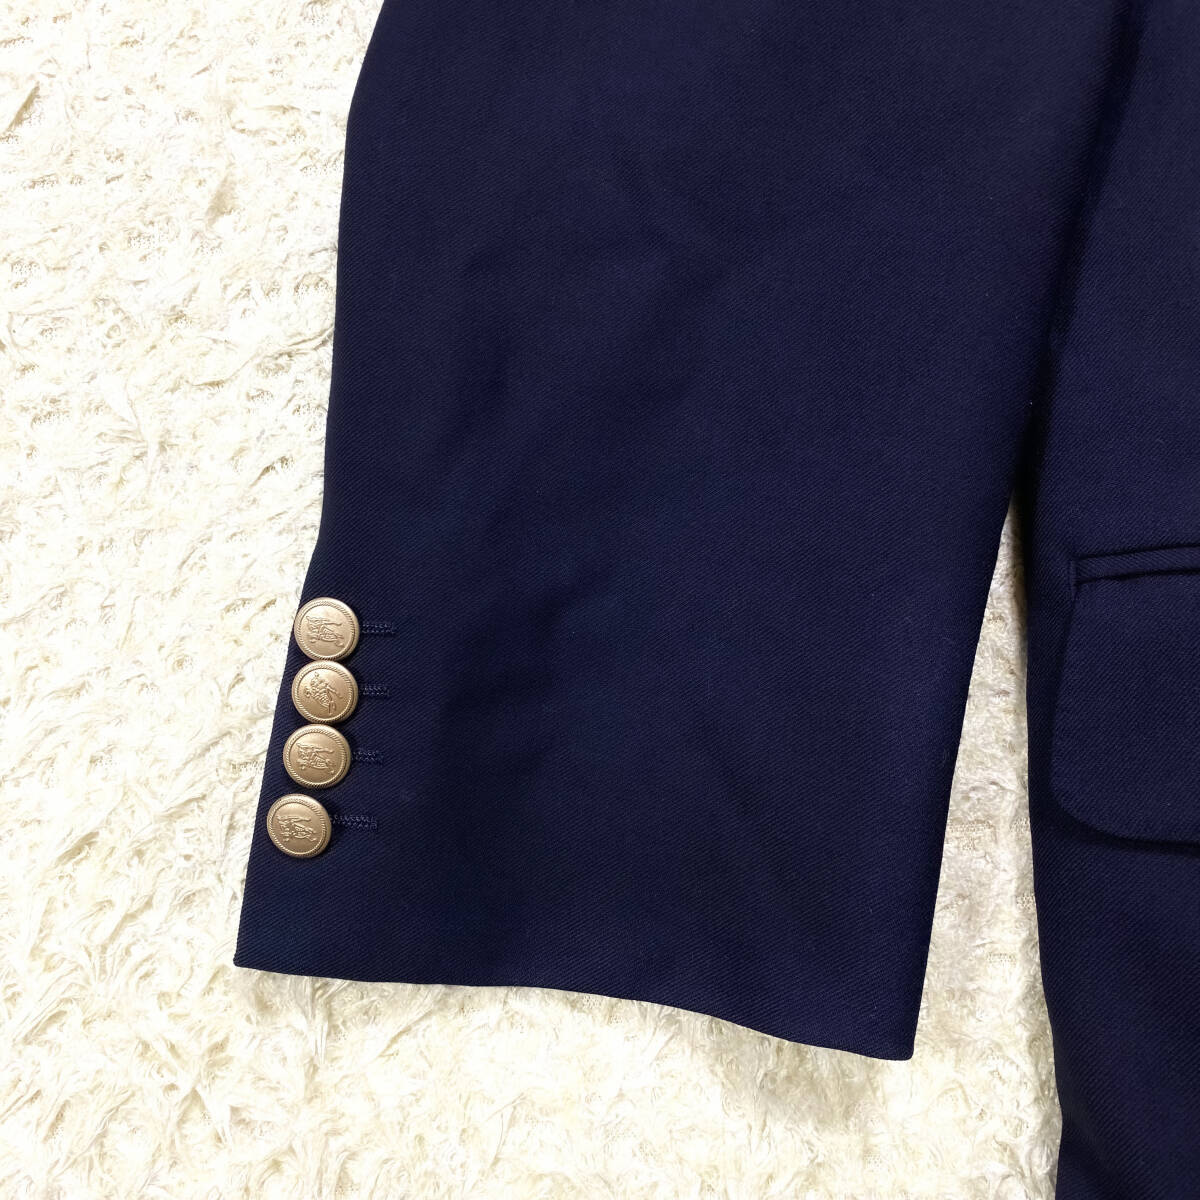  beautiful goods gold .BURBERRY LONDON tailored jacket cashmere go in XL.LL~L gold metal button BB6 hose Logo pattern navy navy blue blaser large . Burberry London 